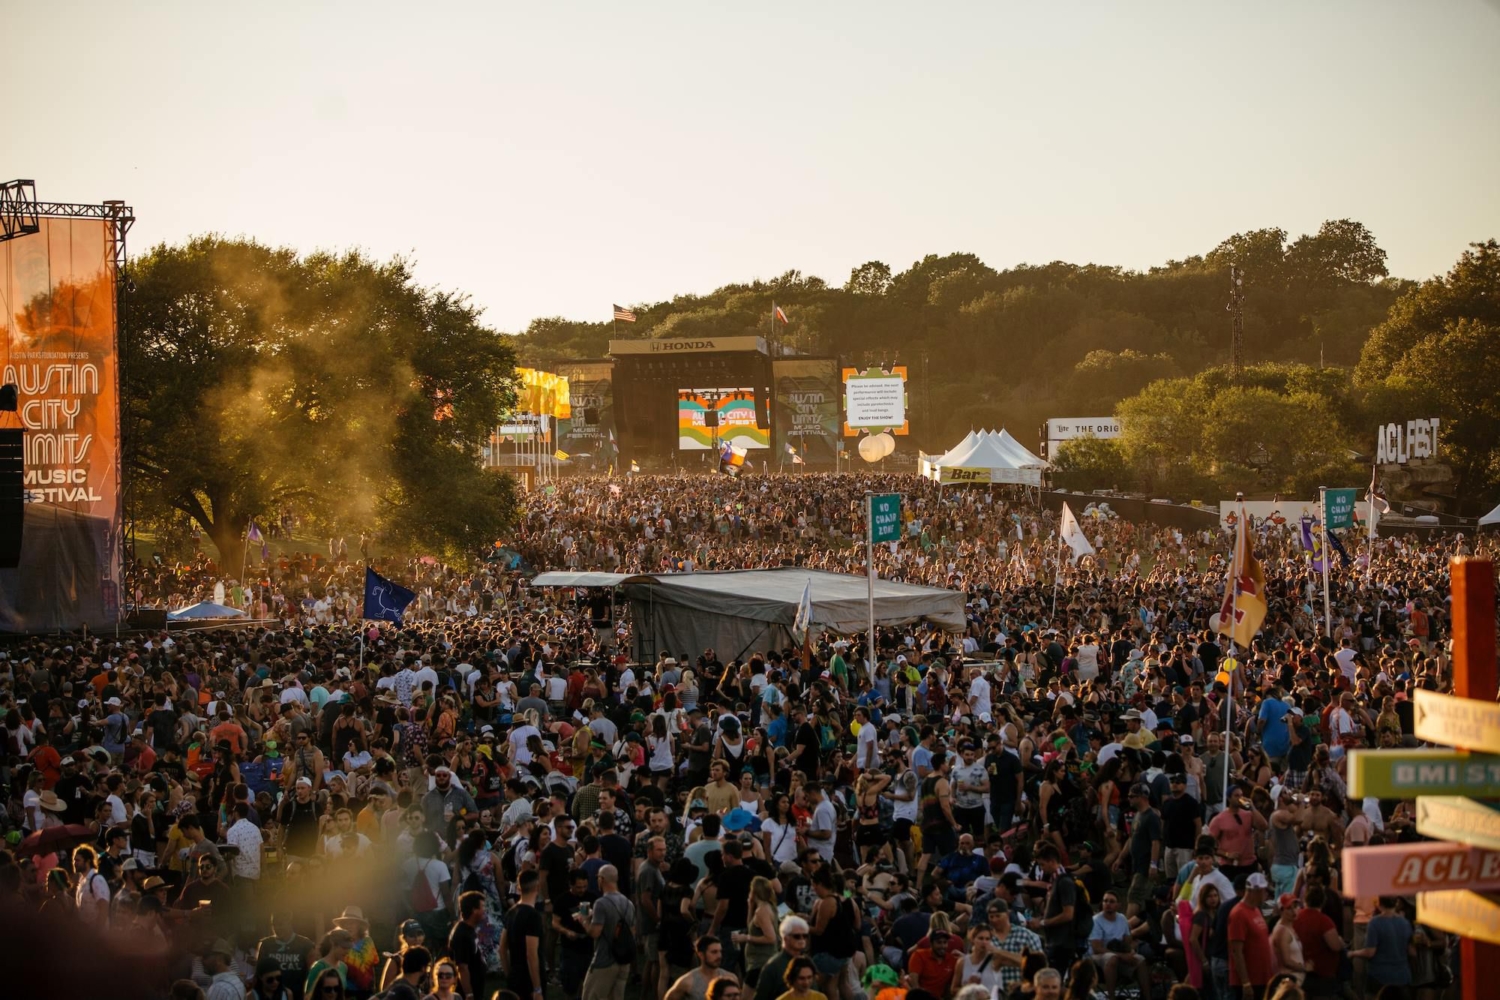 TOP 40 Texas Music Festivals in 2024 [UPDATED]